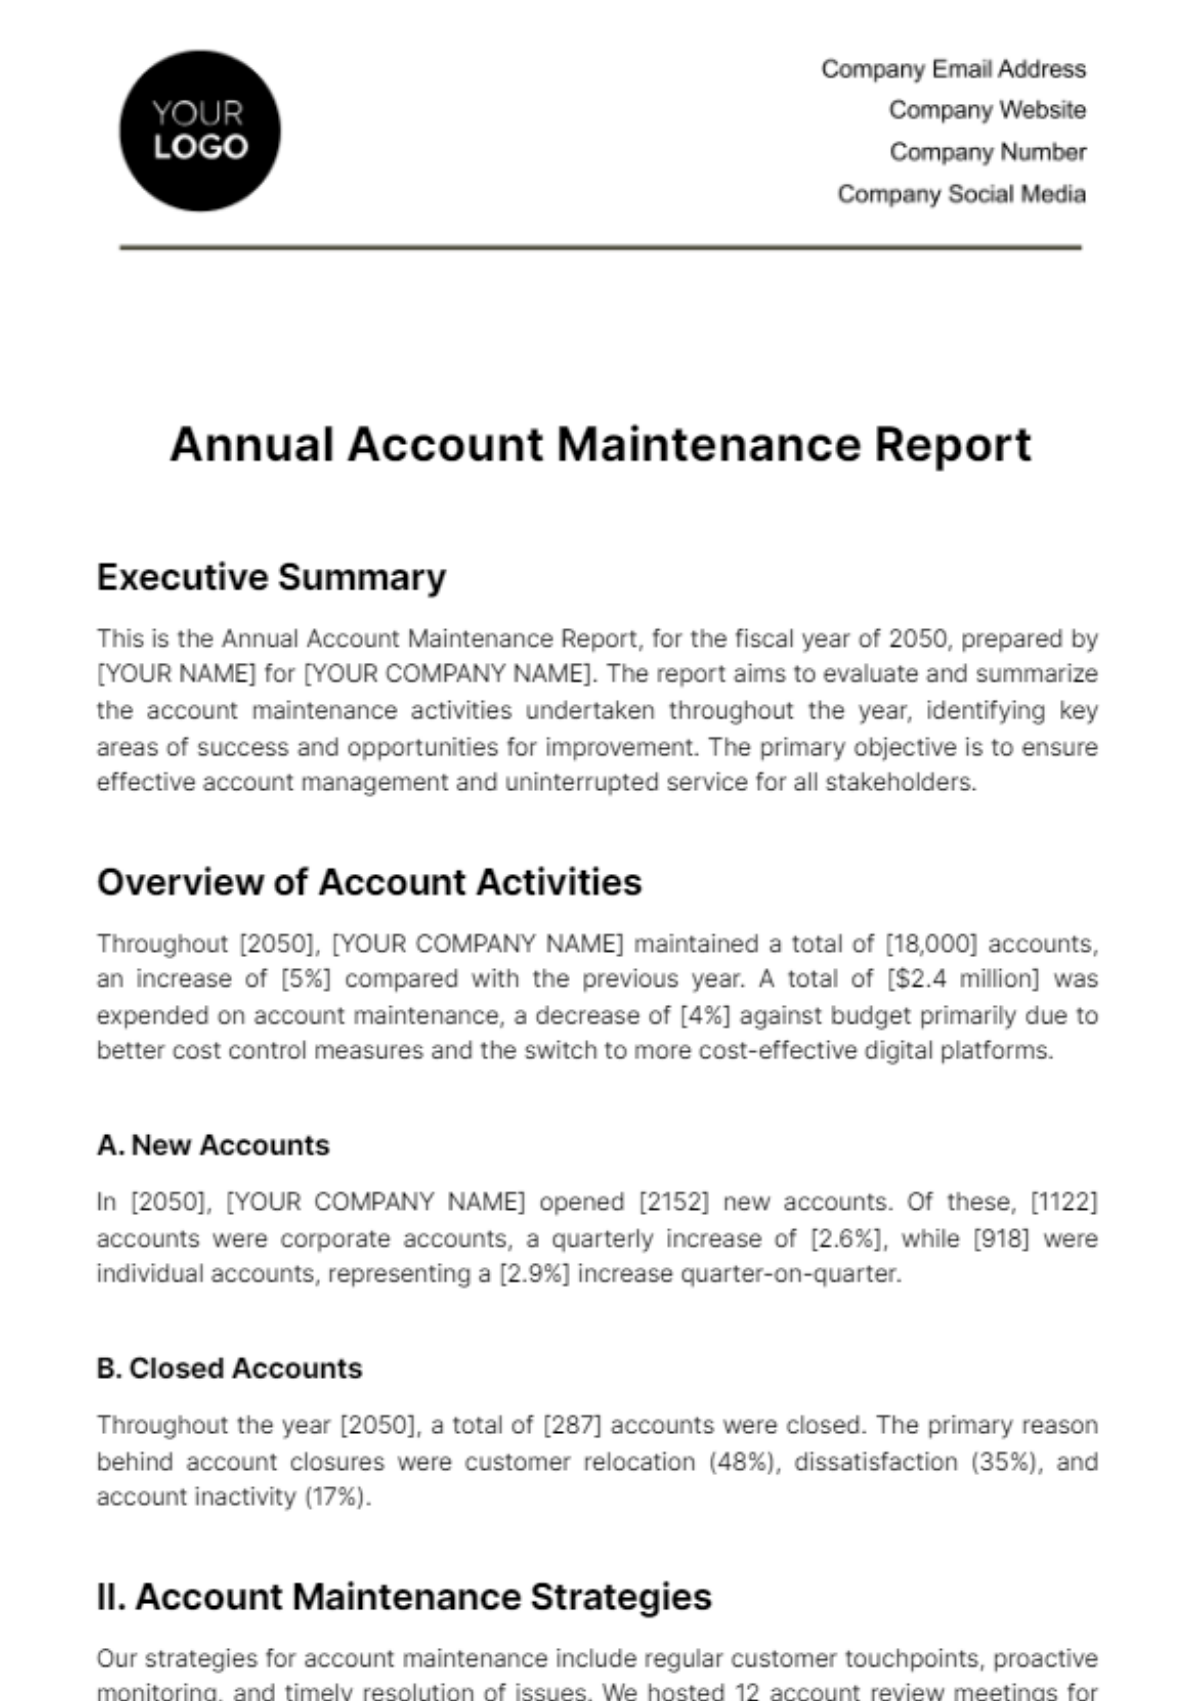 Annual Account Maintenance Report Template